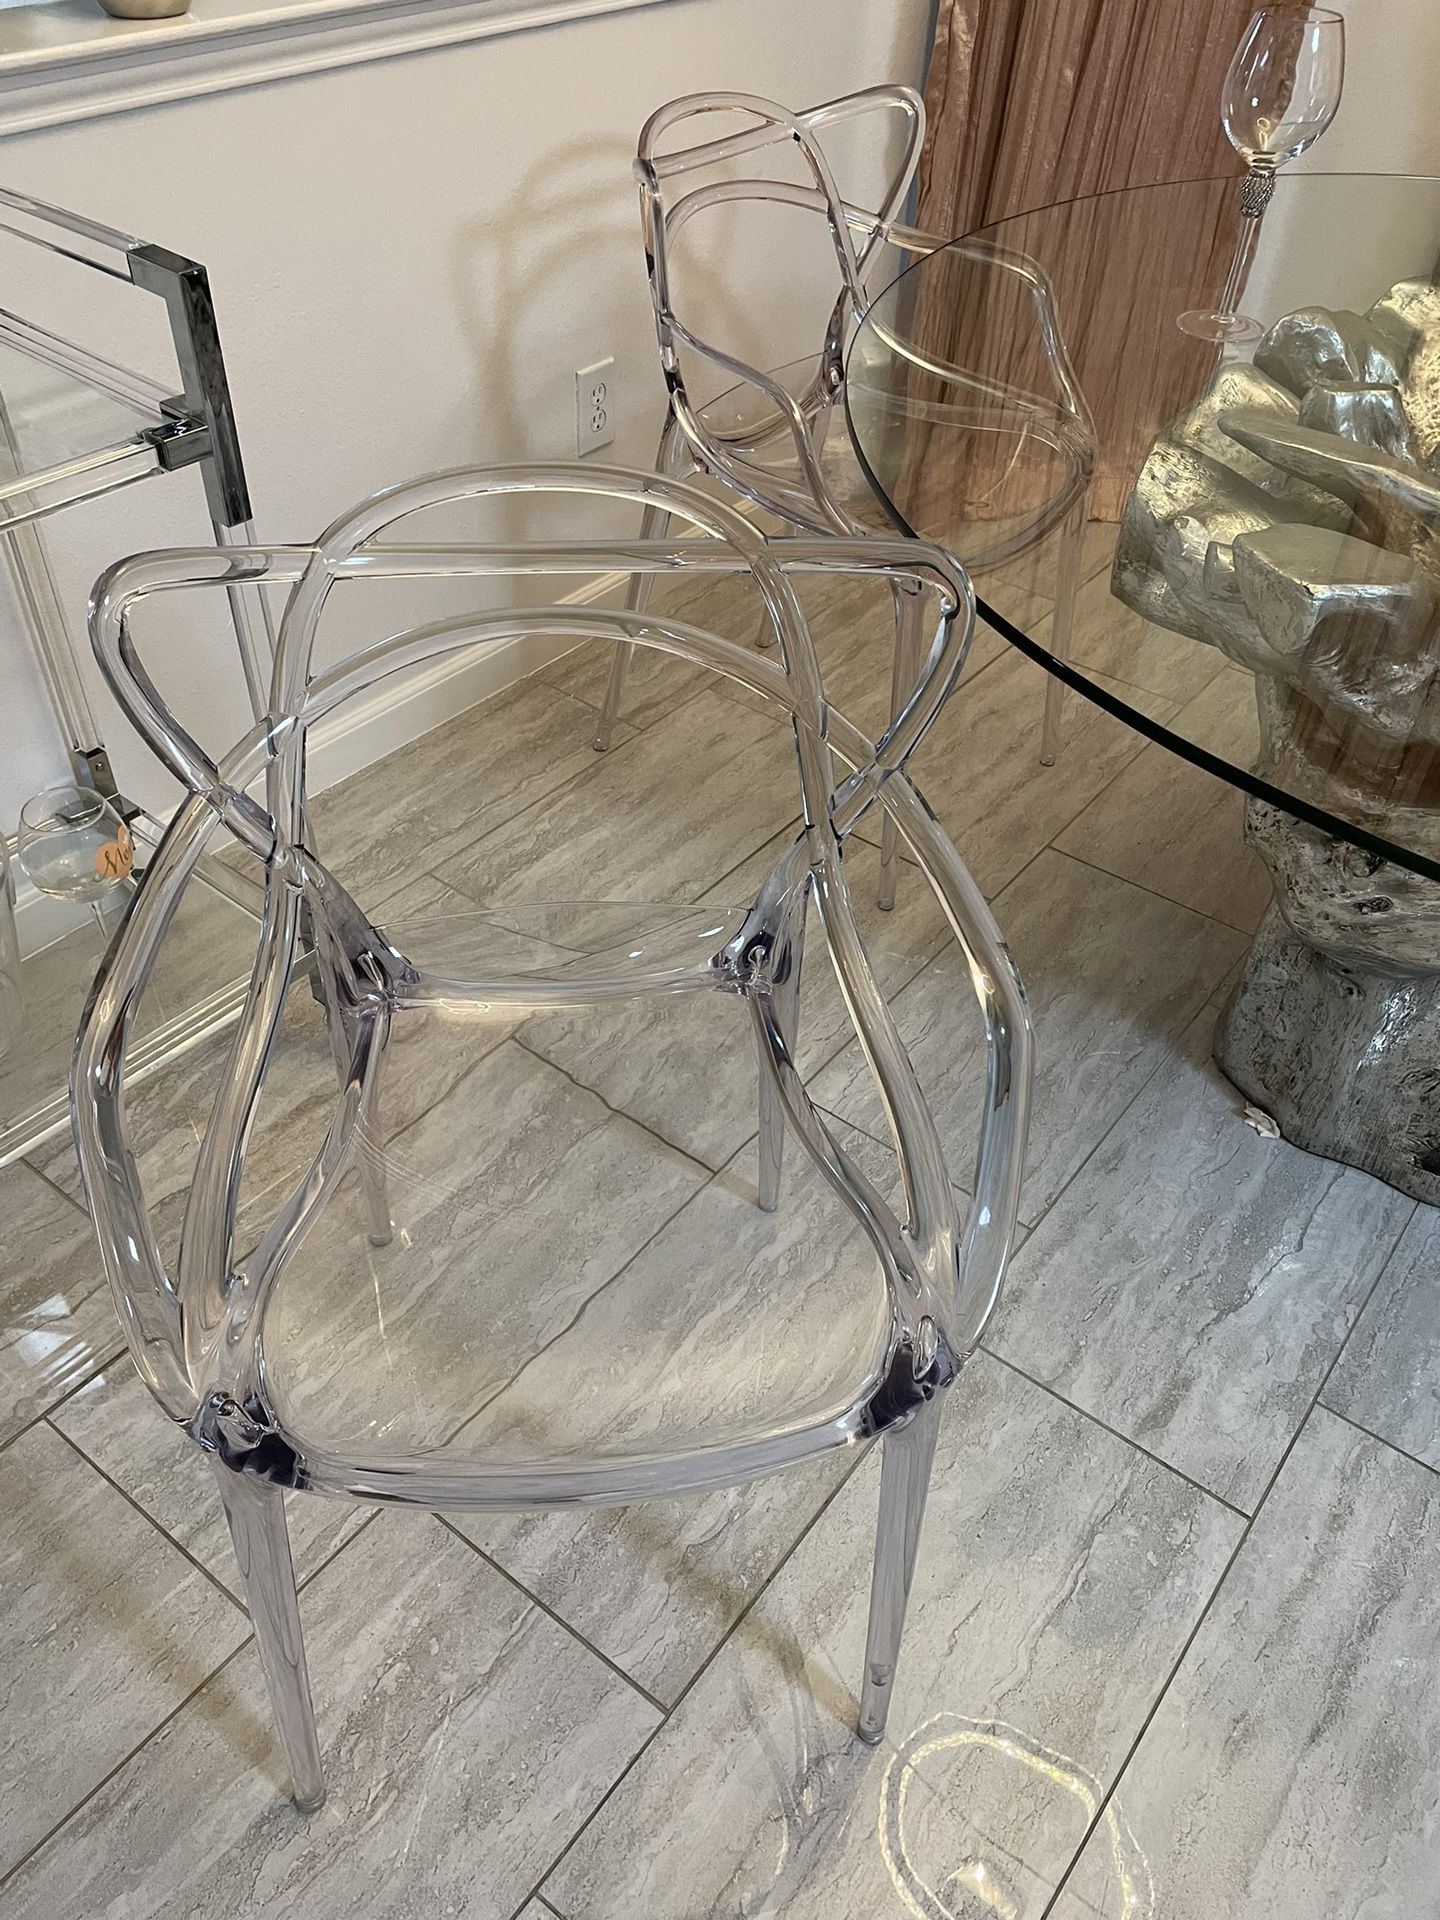 4 Clear Chairs